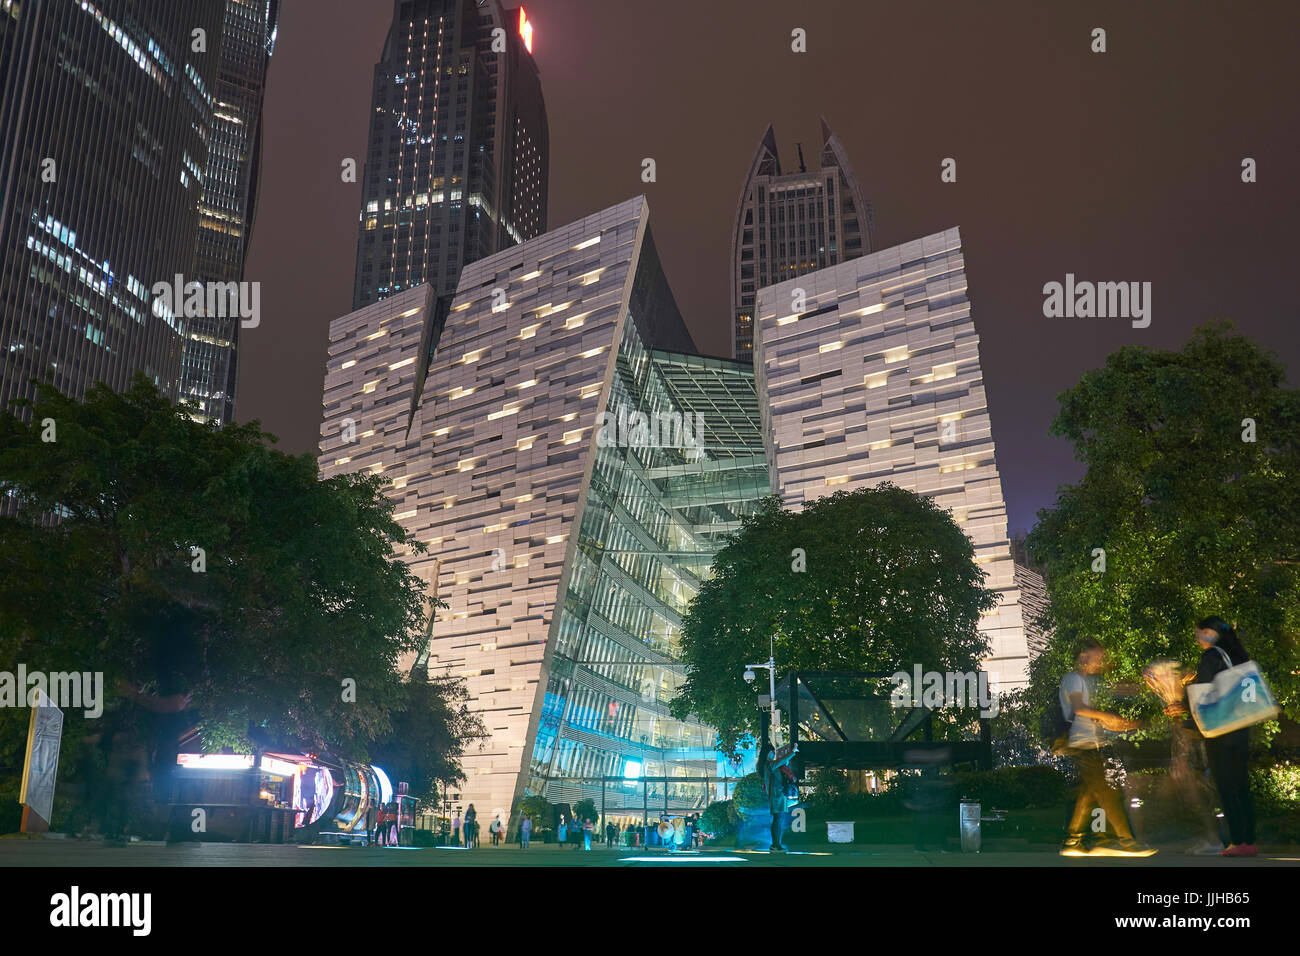 Futuristic facade of the new Guangzhou Library at night - modern Chinese public service architecture Stock Photo